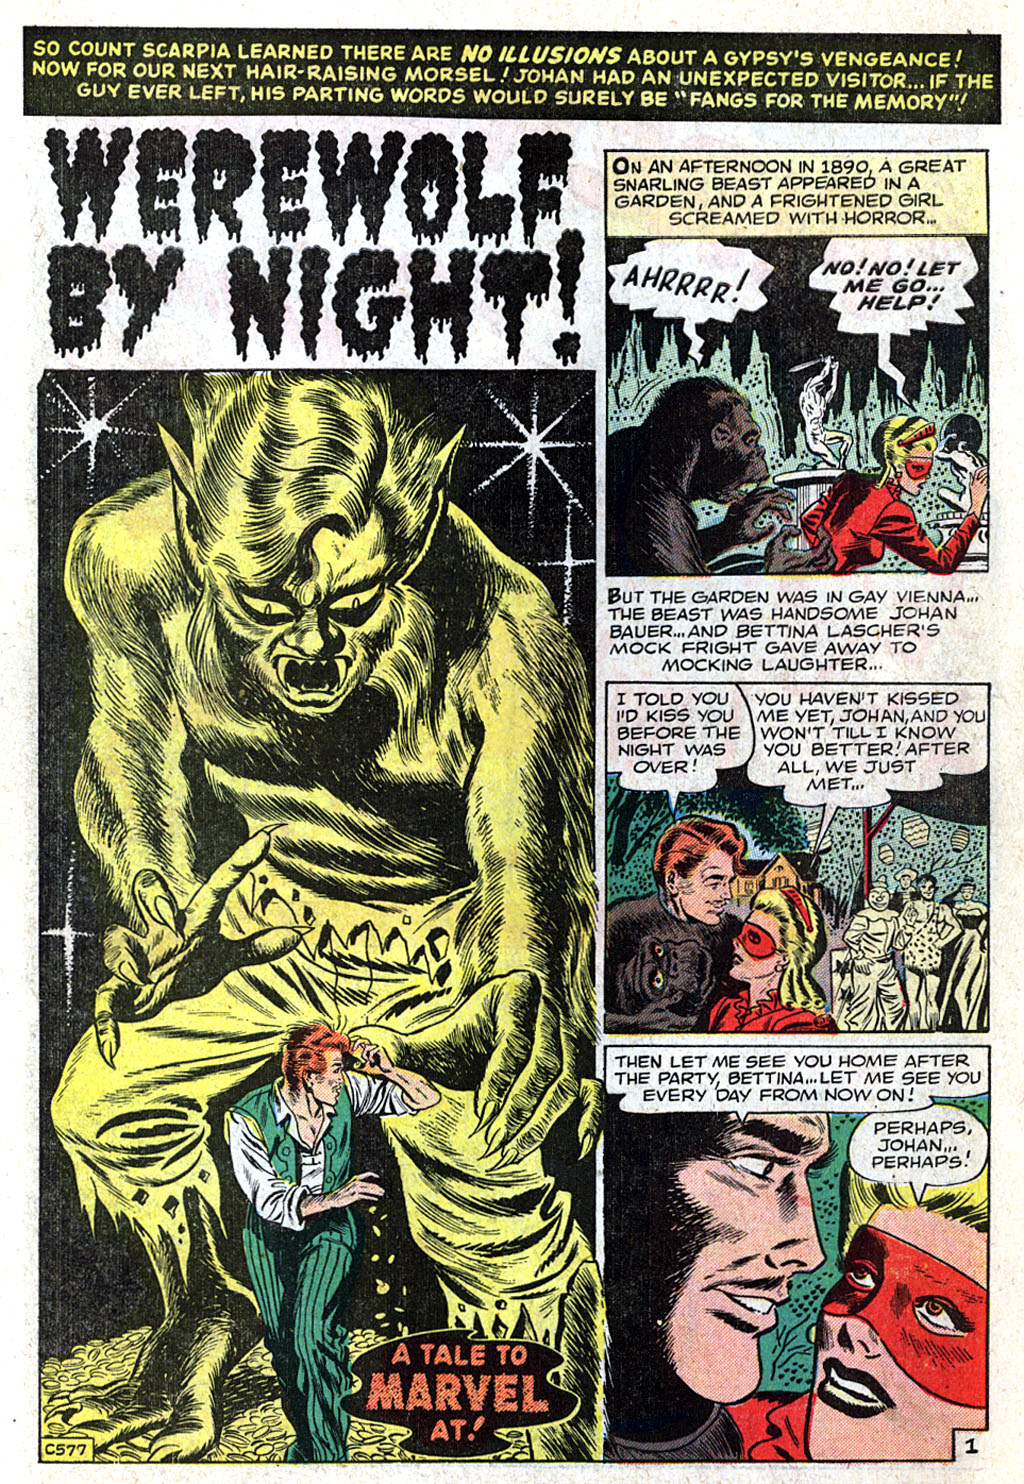 Marvel Tales (1949) 116 Page 8